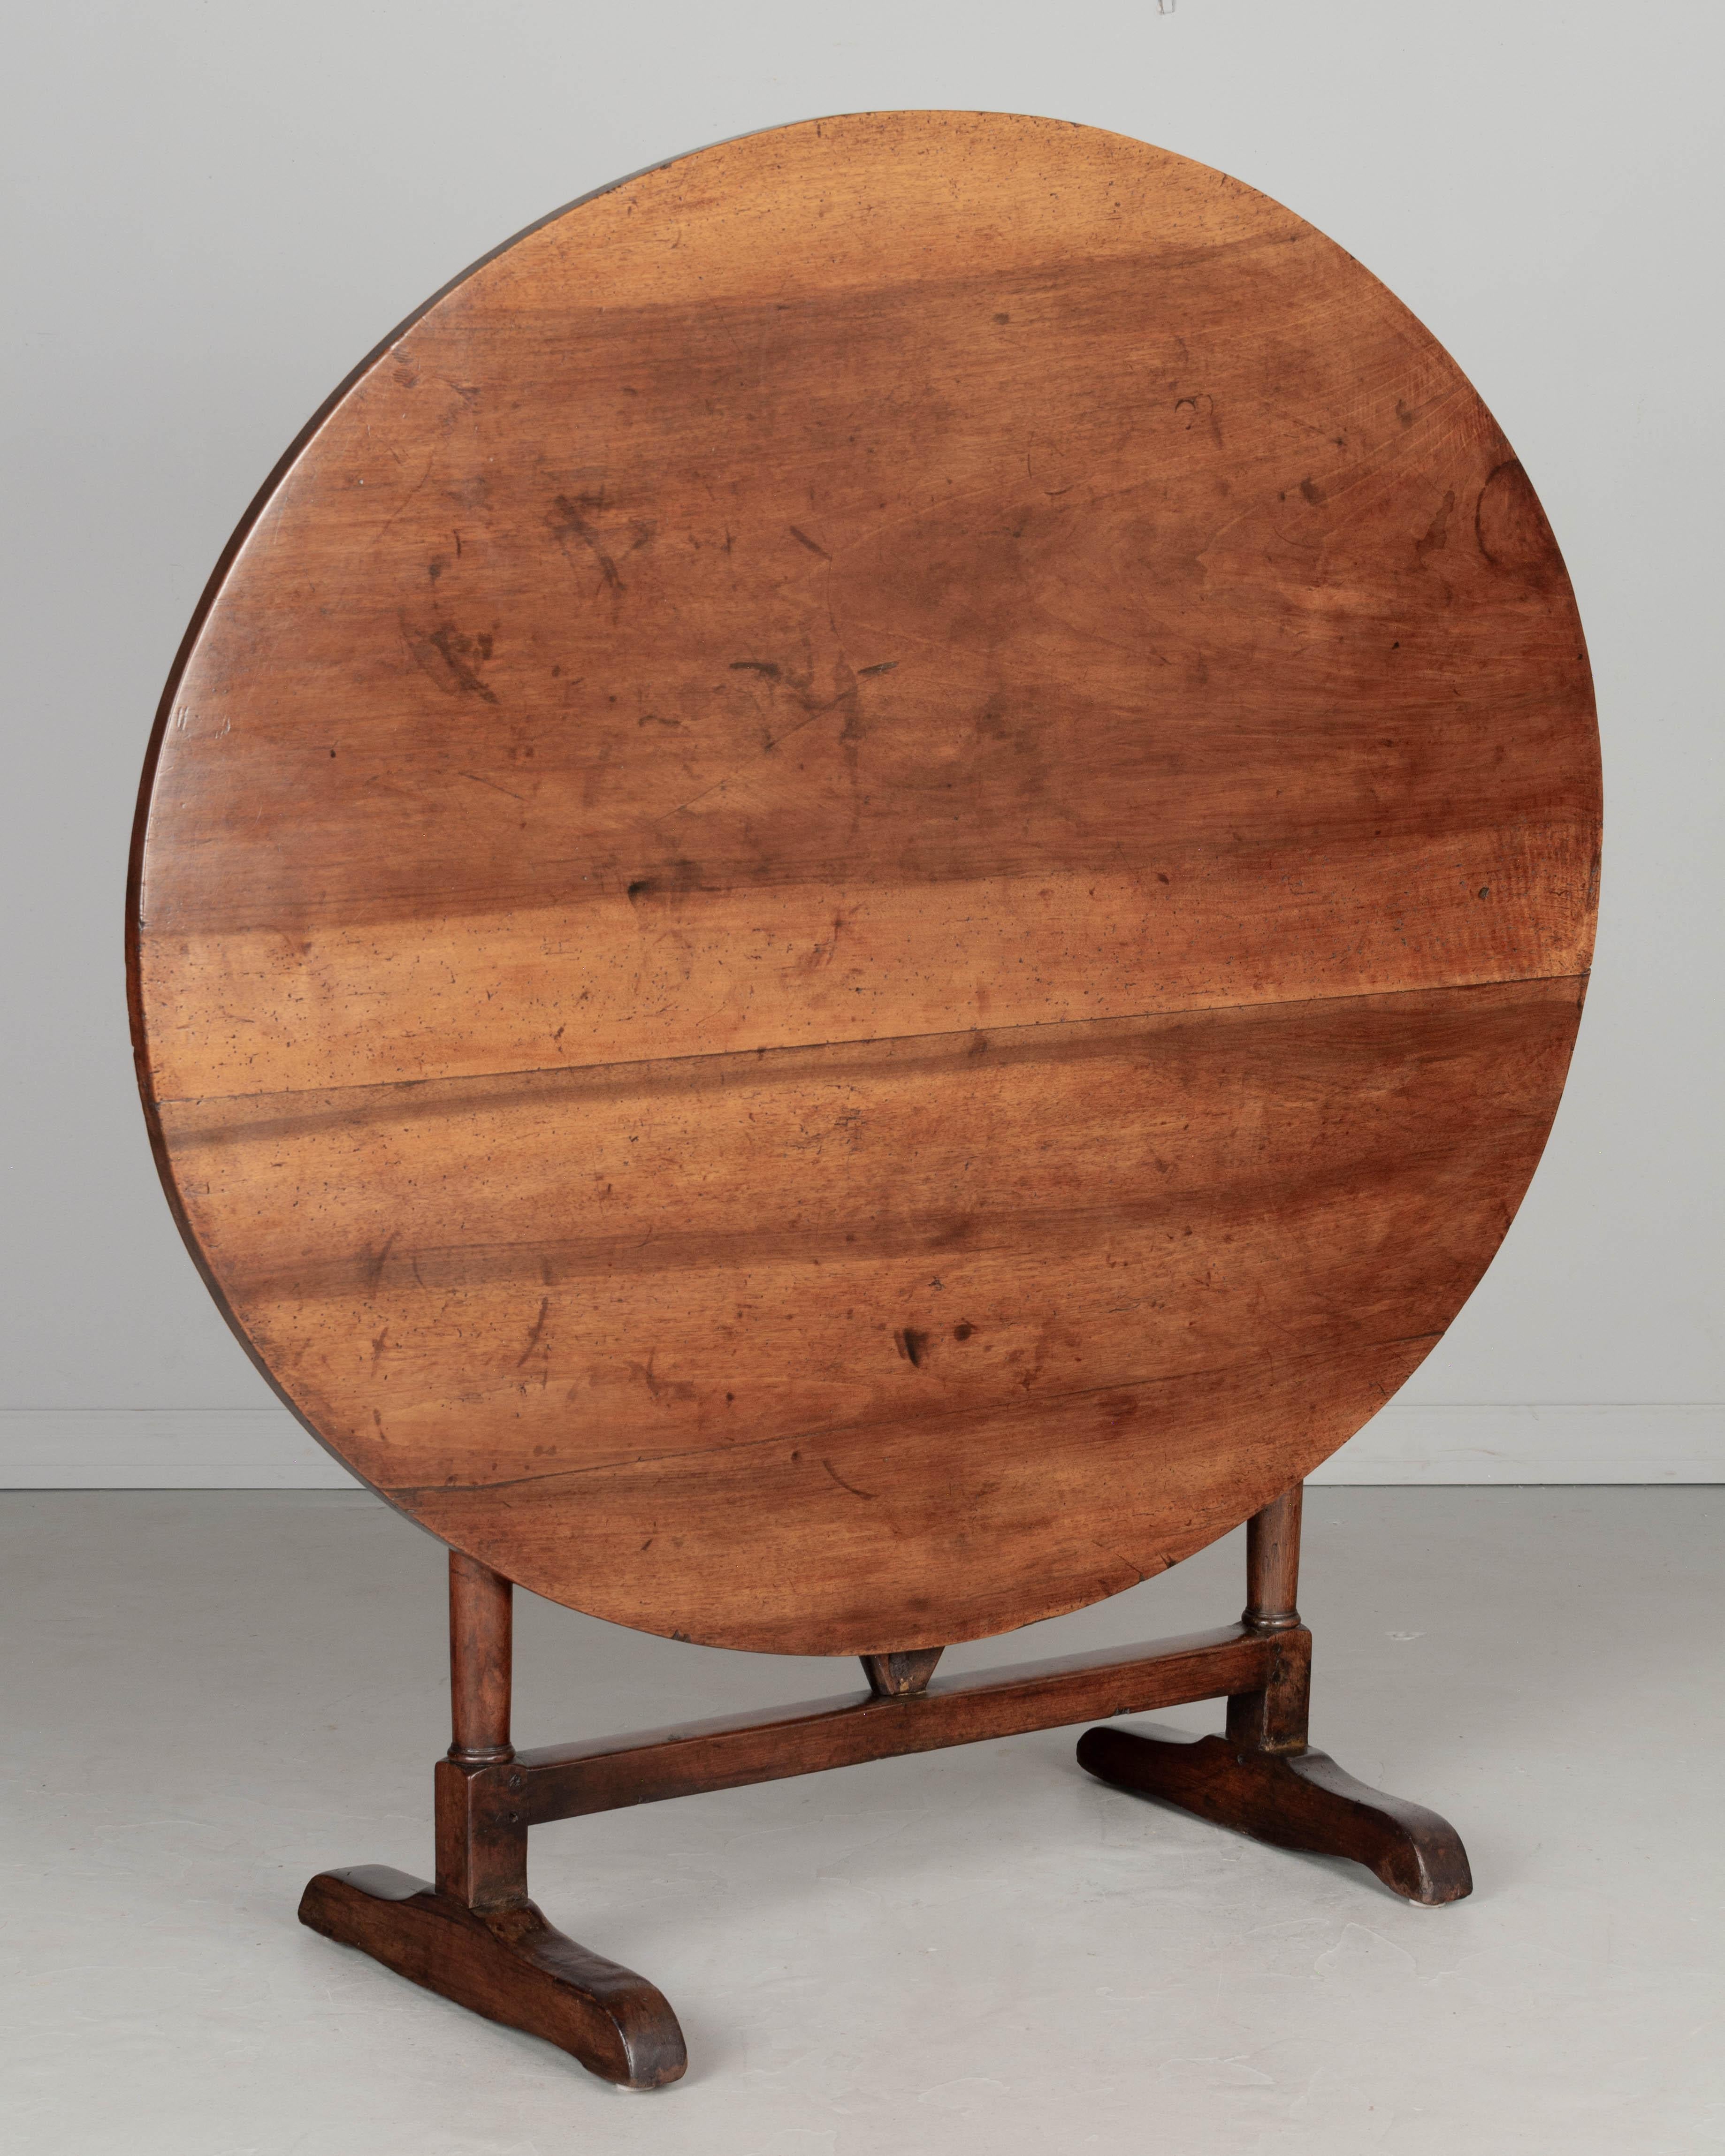 A 19th century French oval wine tasting, or tilt-top table made of walnut. The top is made from three planks of solid walnut, one 24